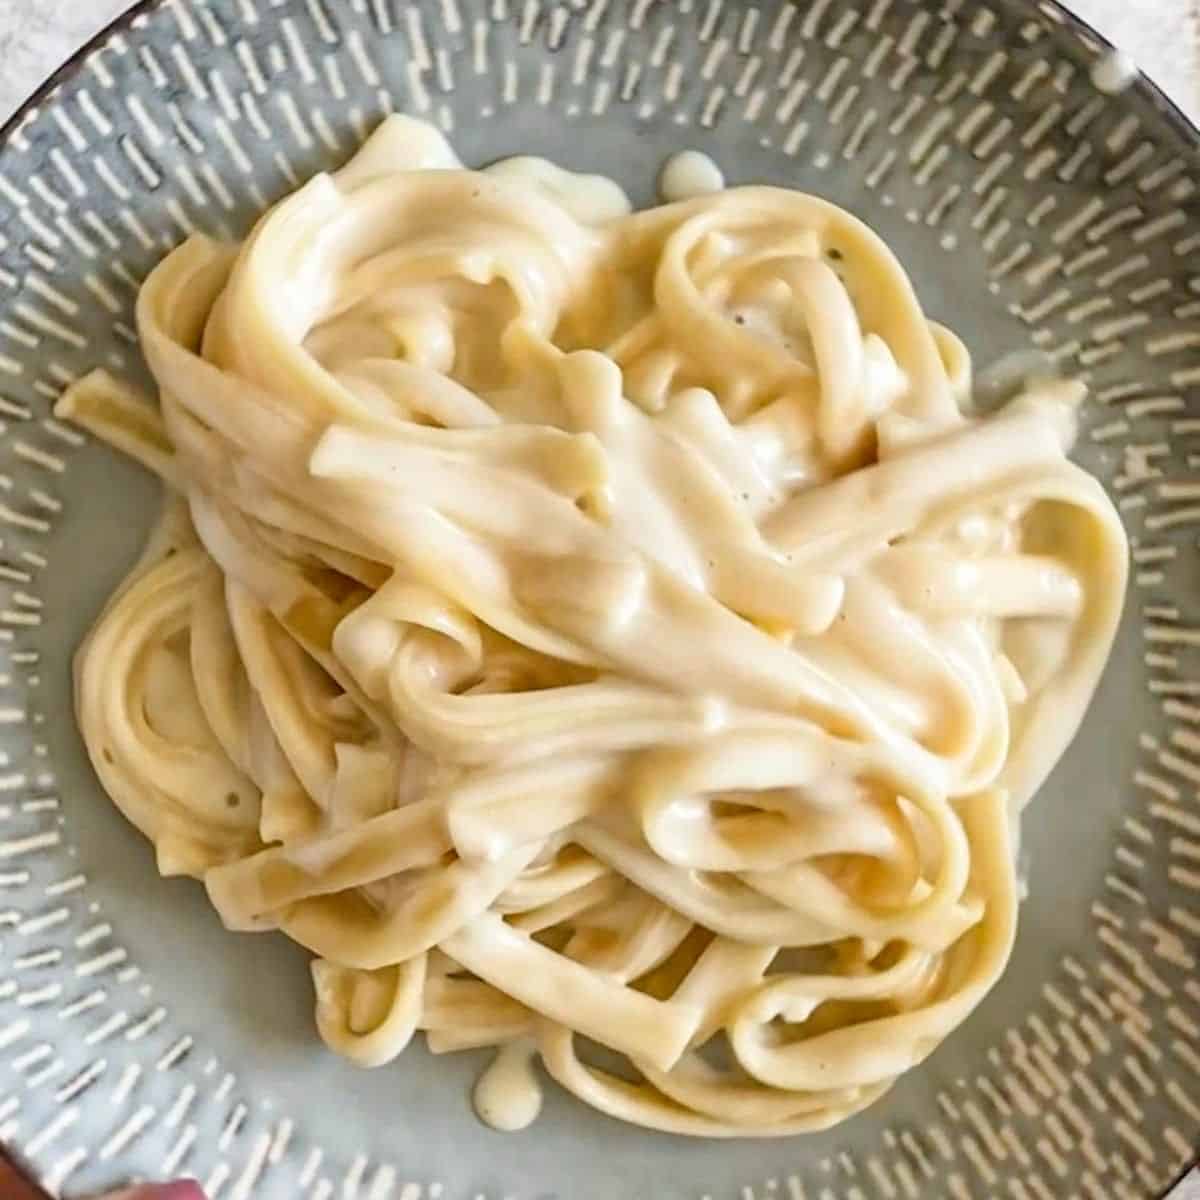 What To Serve With Fettucine Alfredo - 25 Ideas! - The Foreign Fork